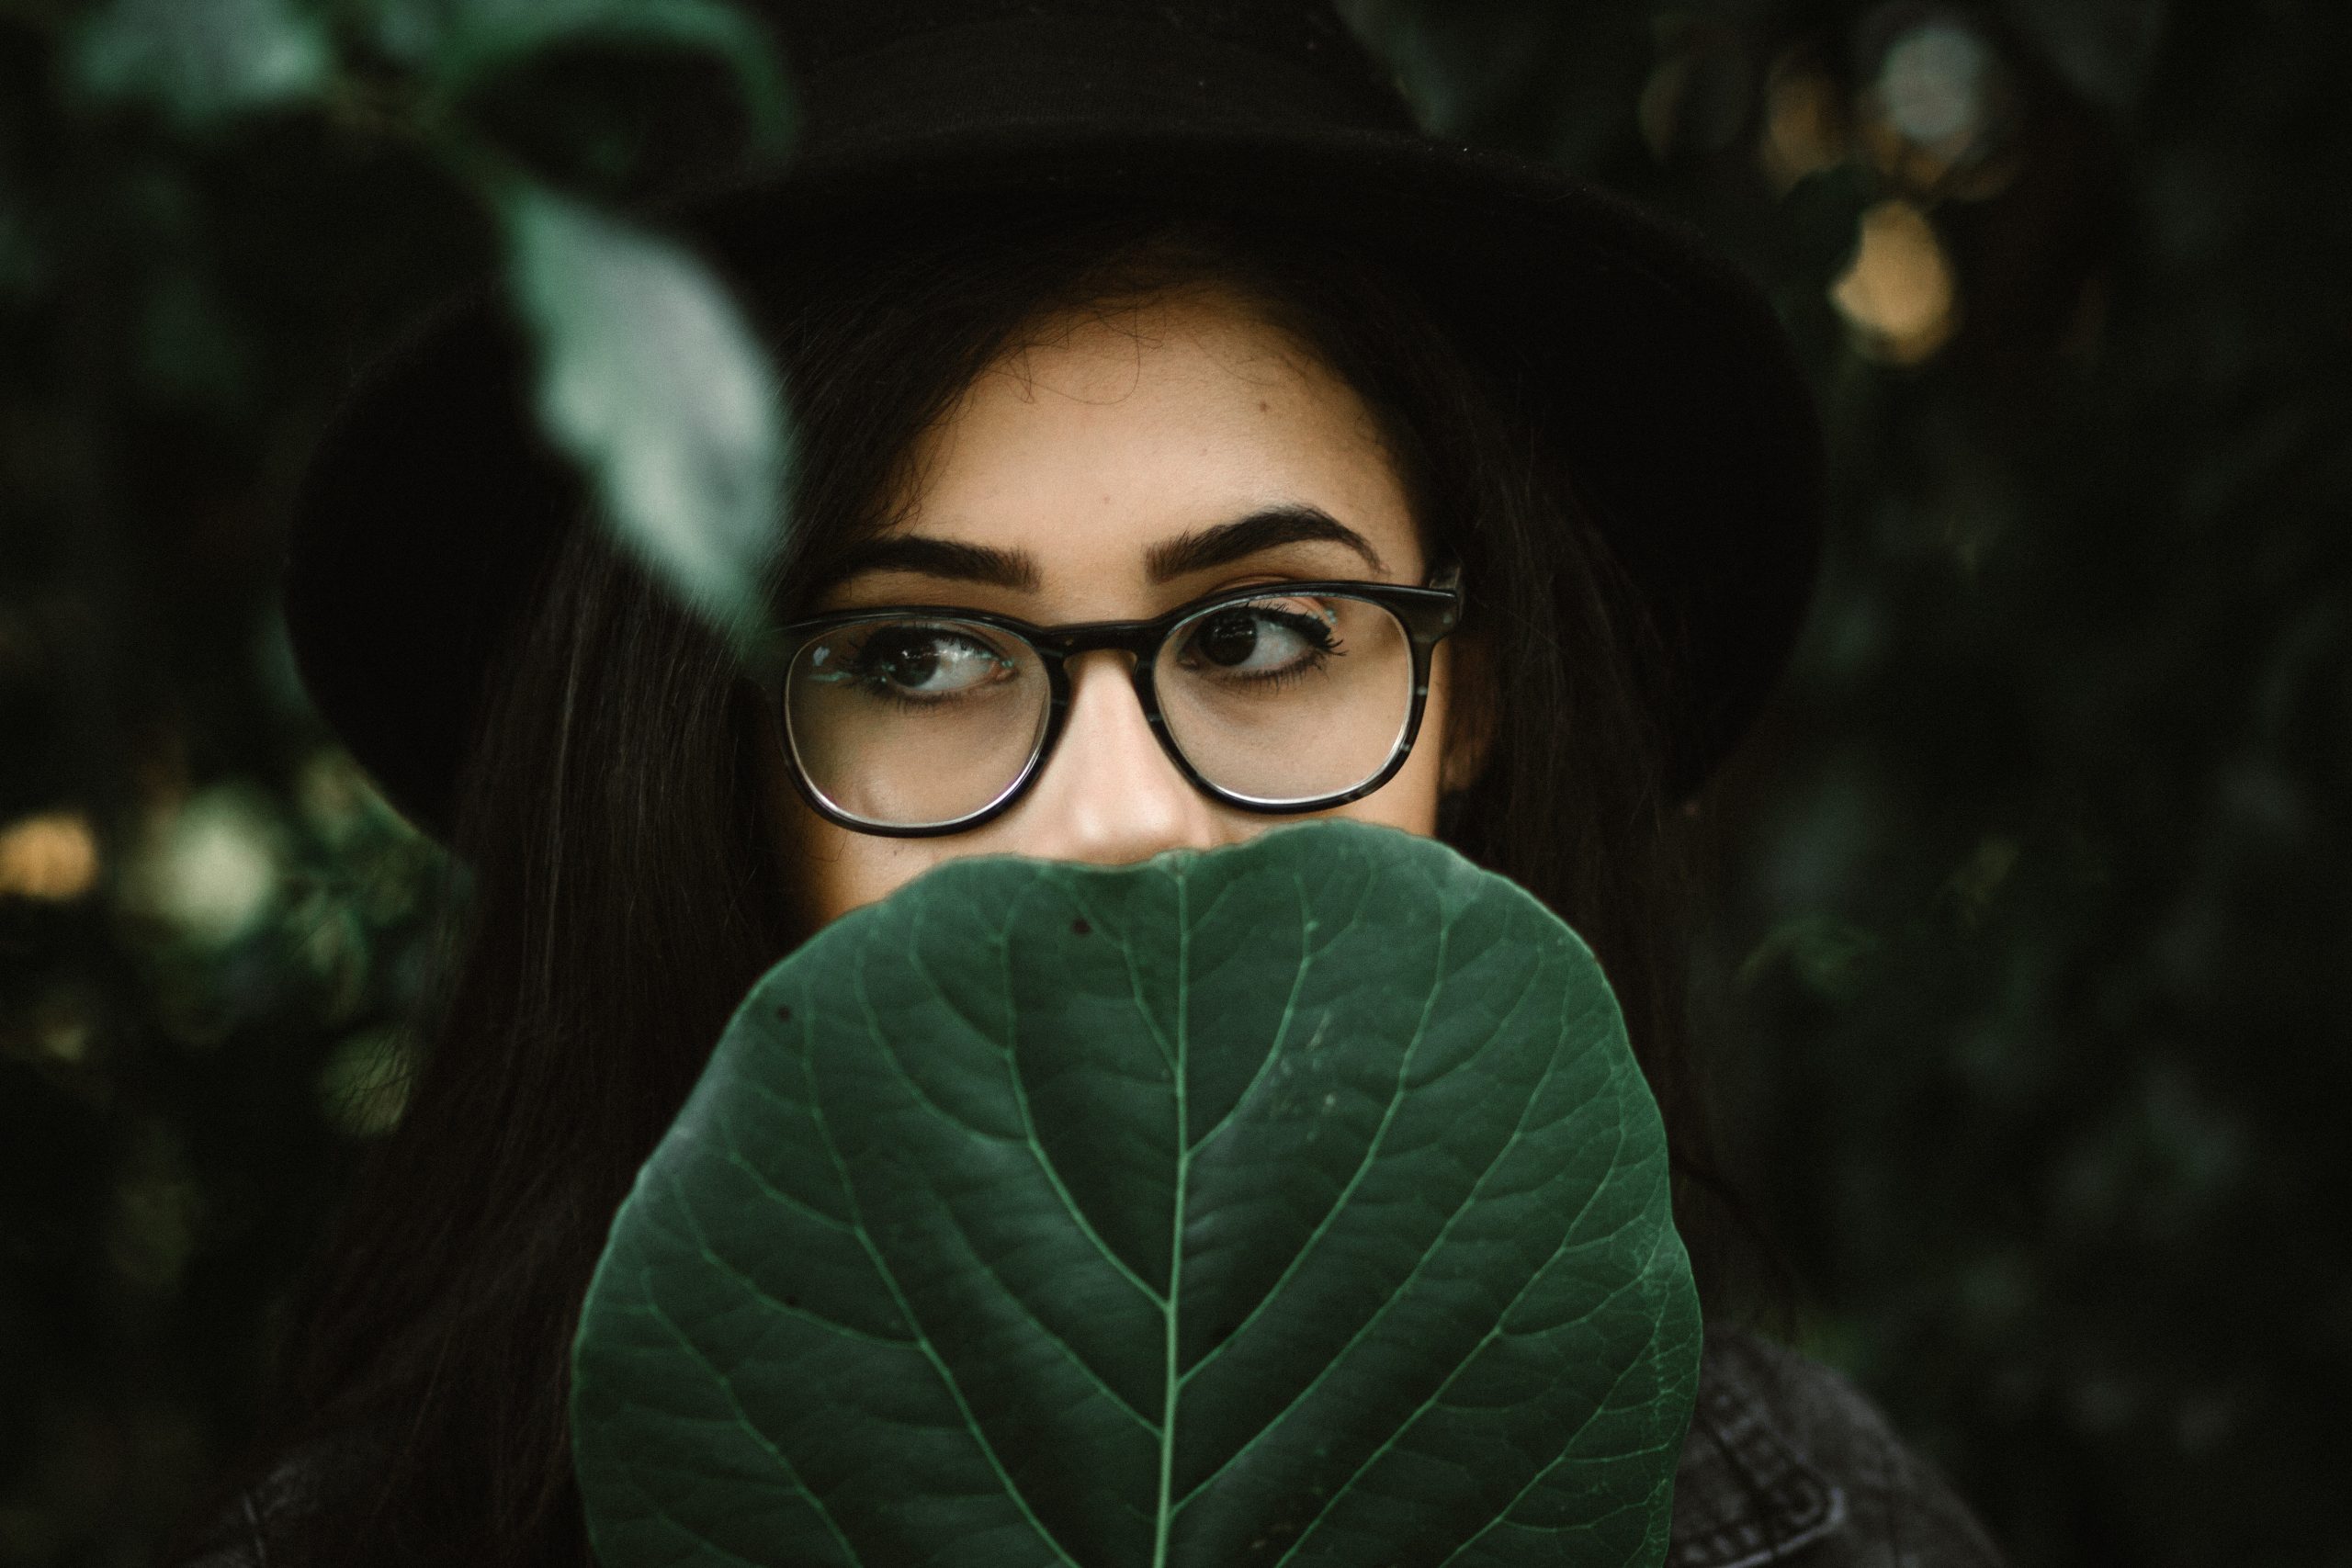 artistic photo of young woman with dark hair and glasses, a black hat, with a large dark geen leaf covering the lower half of her face